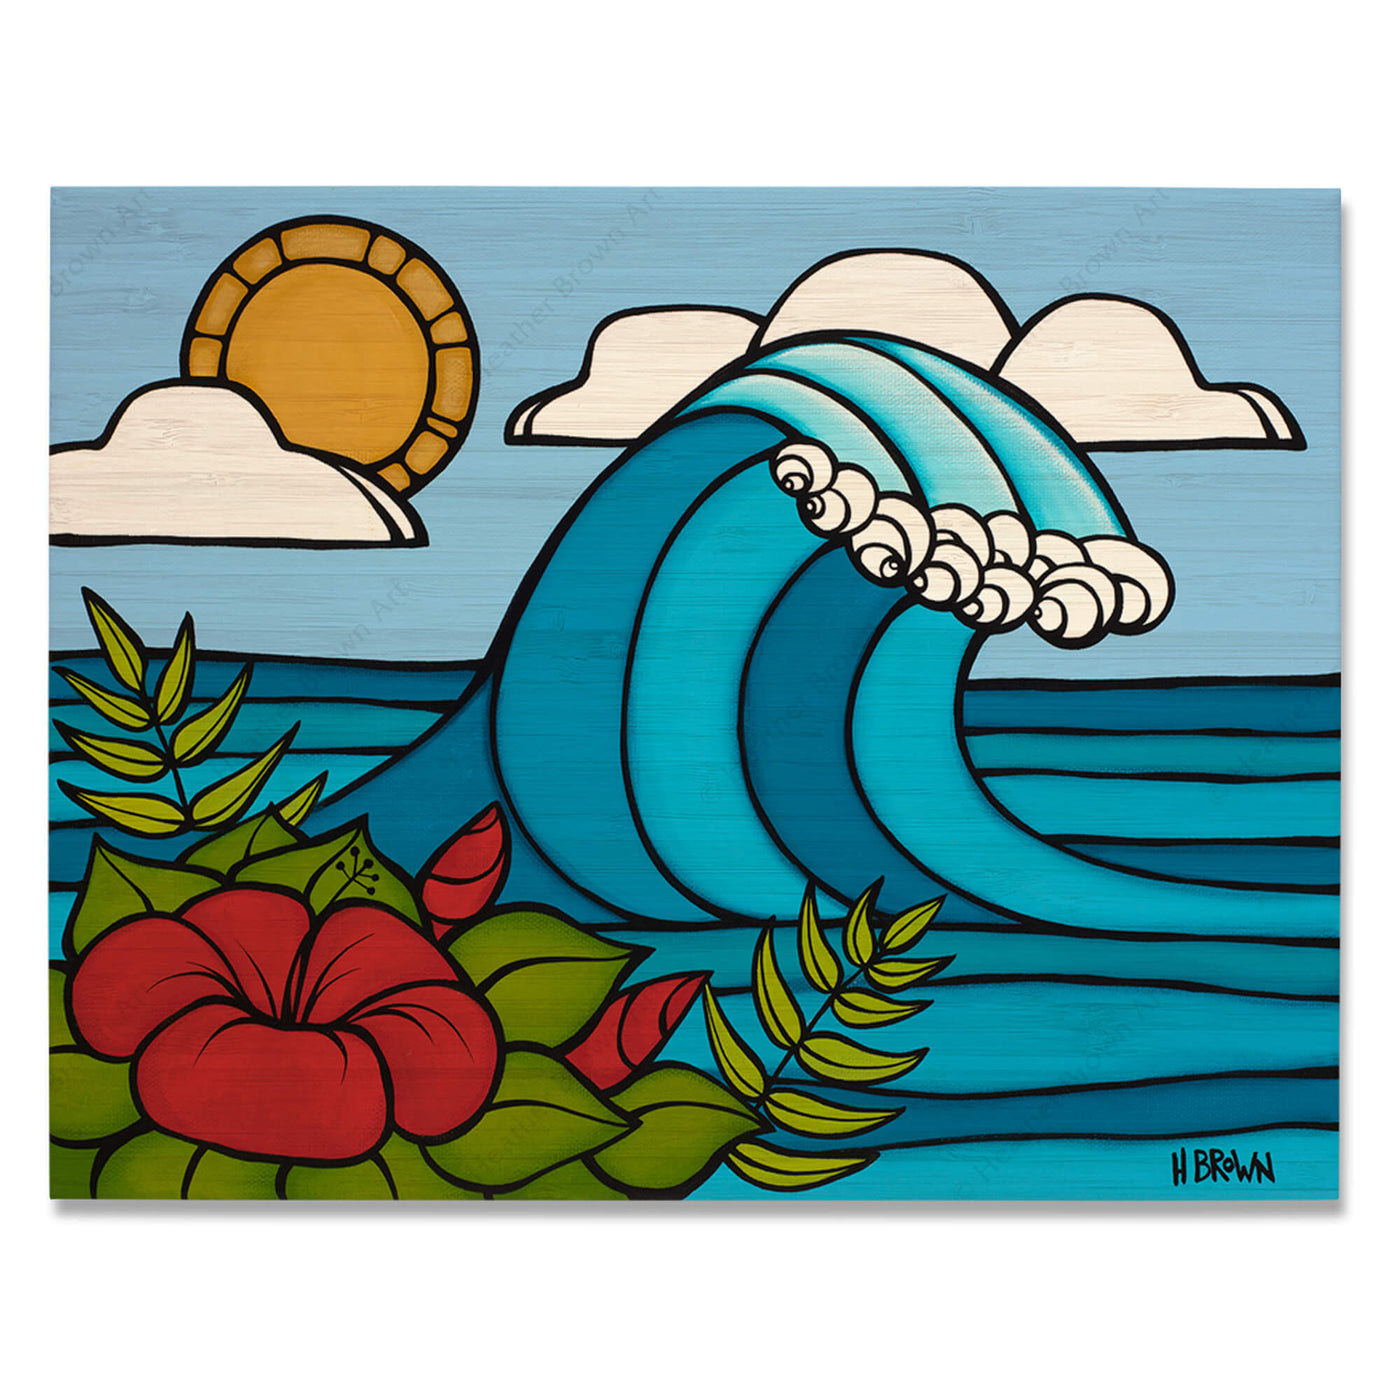 Bamboo print of Hibiscus Swell by Hawaii surf artist Heather Brown